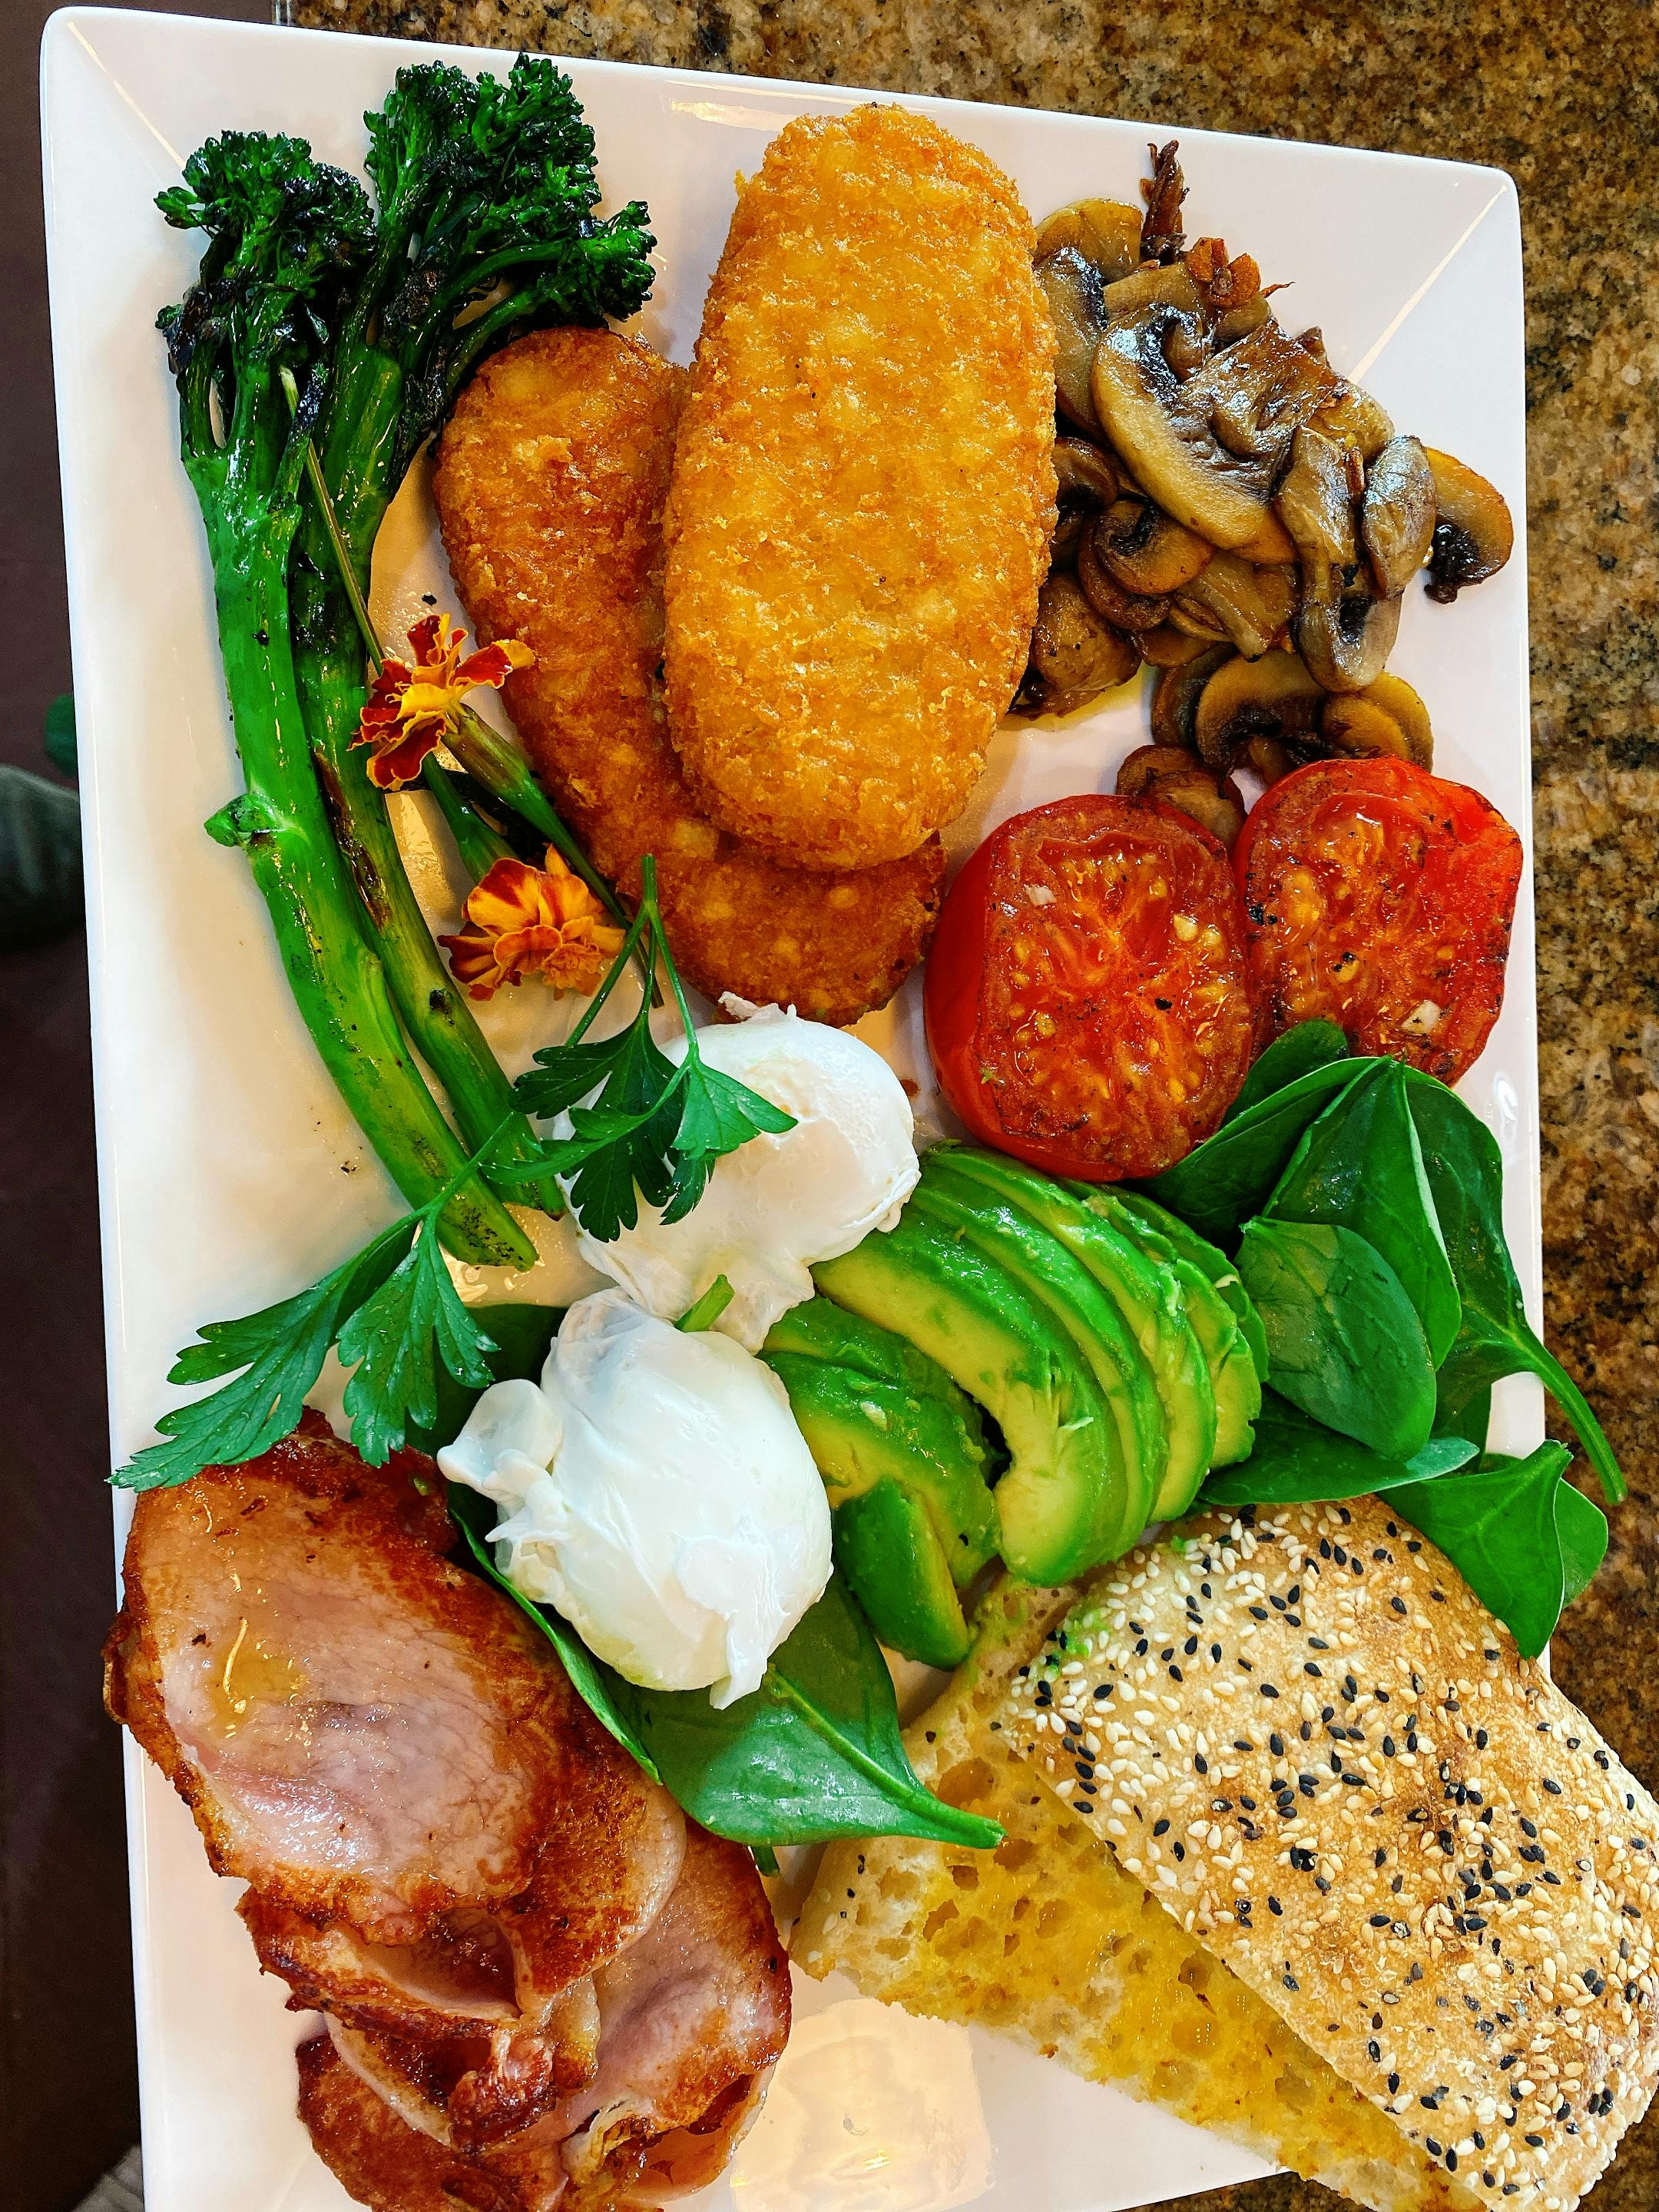 Try our home made gourmet breakfast with lots of ingredients picked from our extensive herb, spices and vegetable gardens